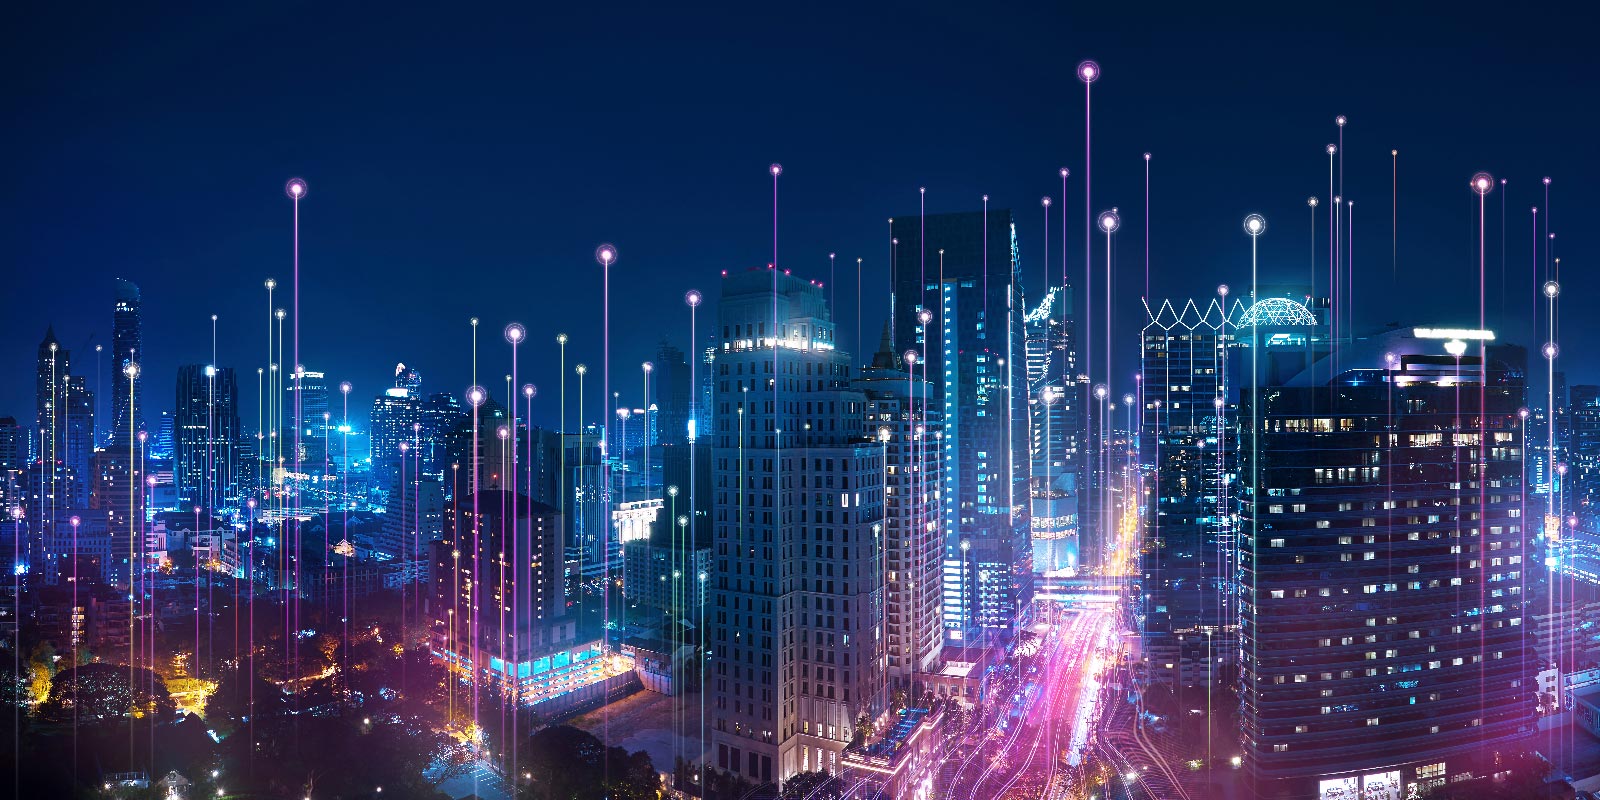 a cityscape aerial view at night with blue and purple digital lines that show connection overlaid on the city